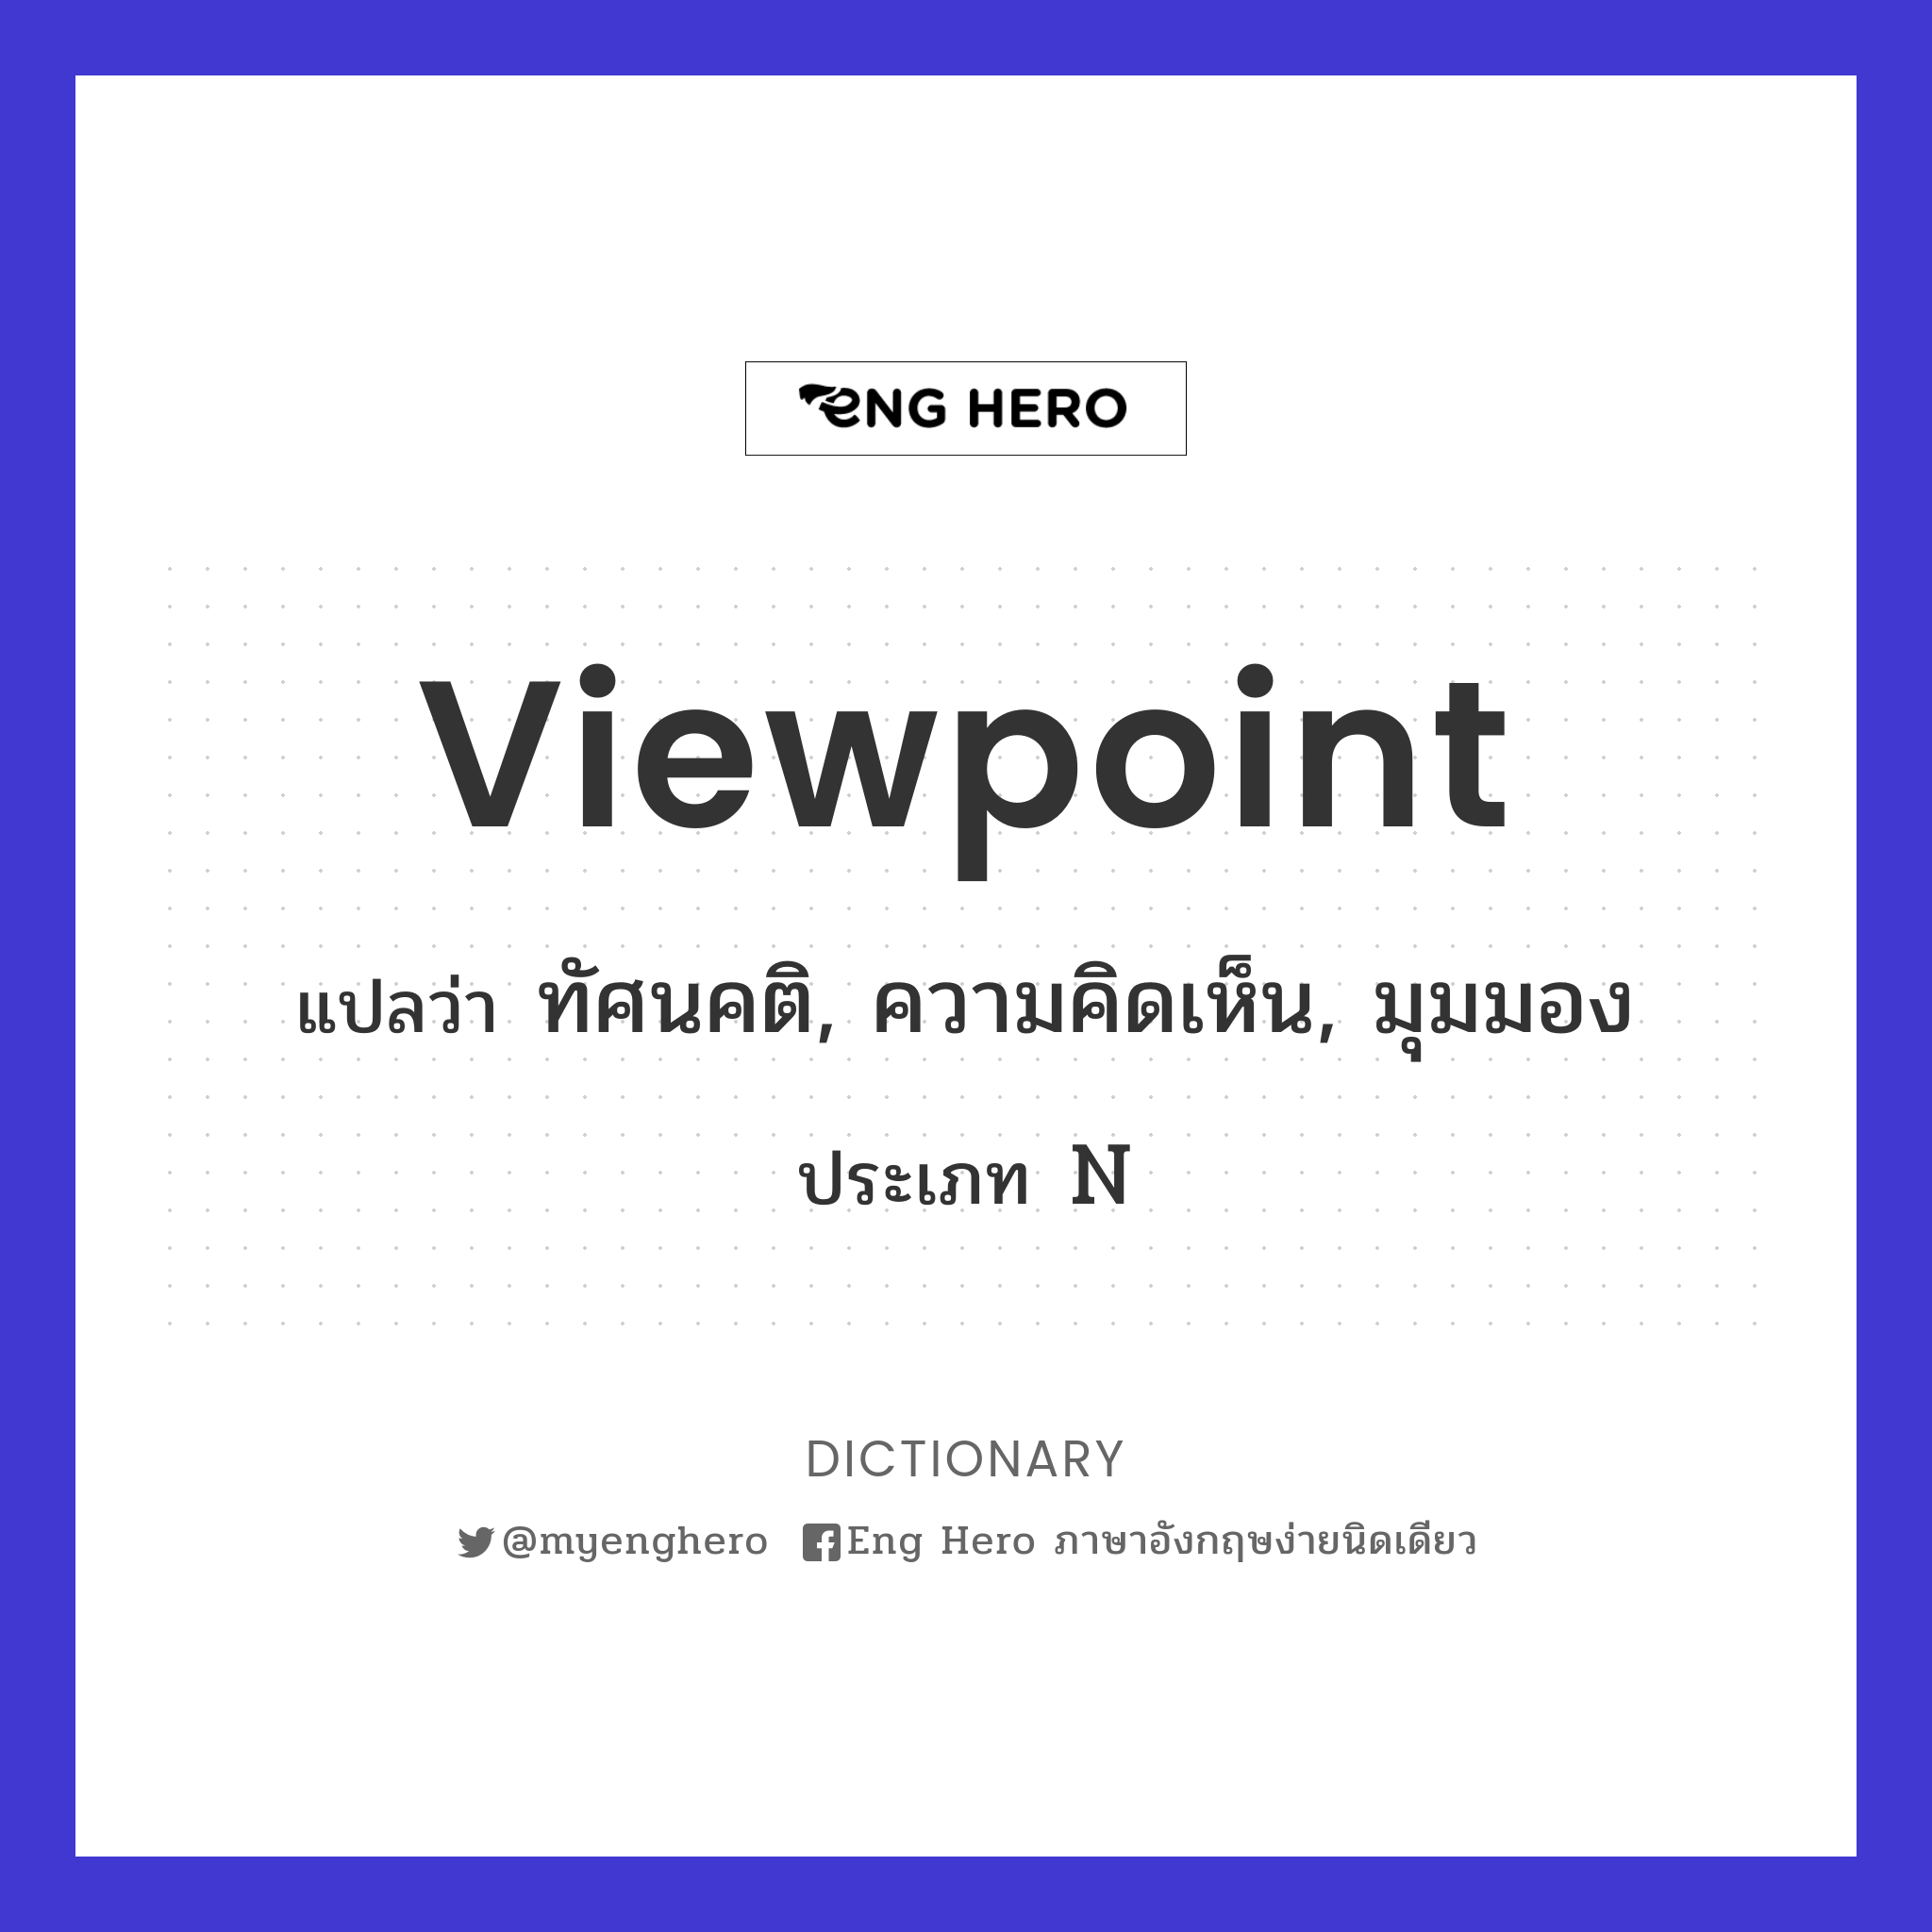 viewpoint